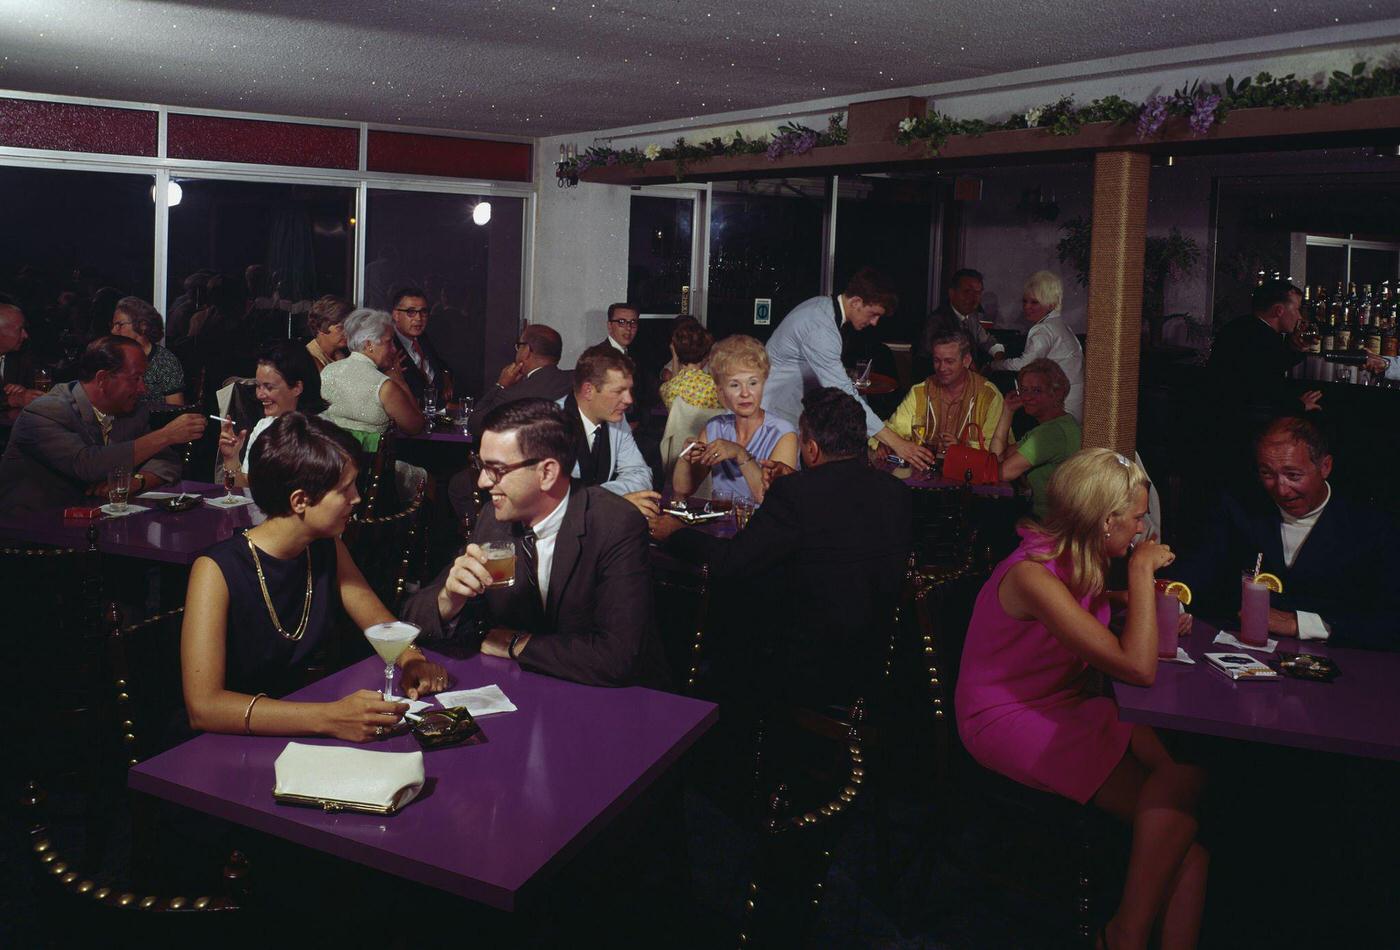 Royal Anchor motel bar and lounge, Old Orchard Beach, Maine, 1960s.